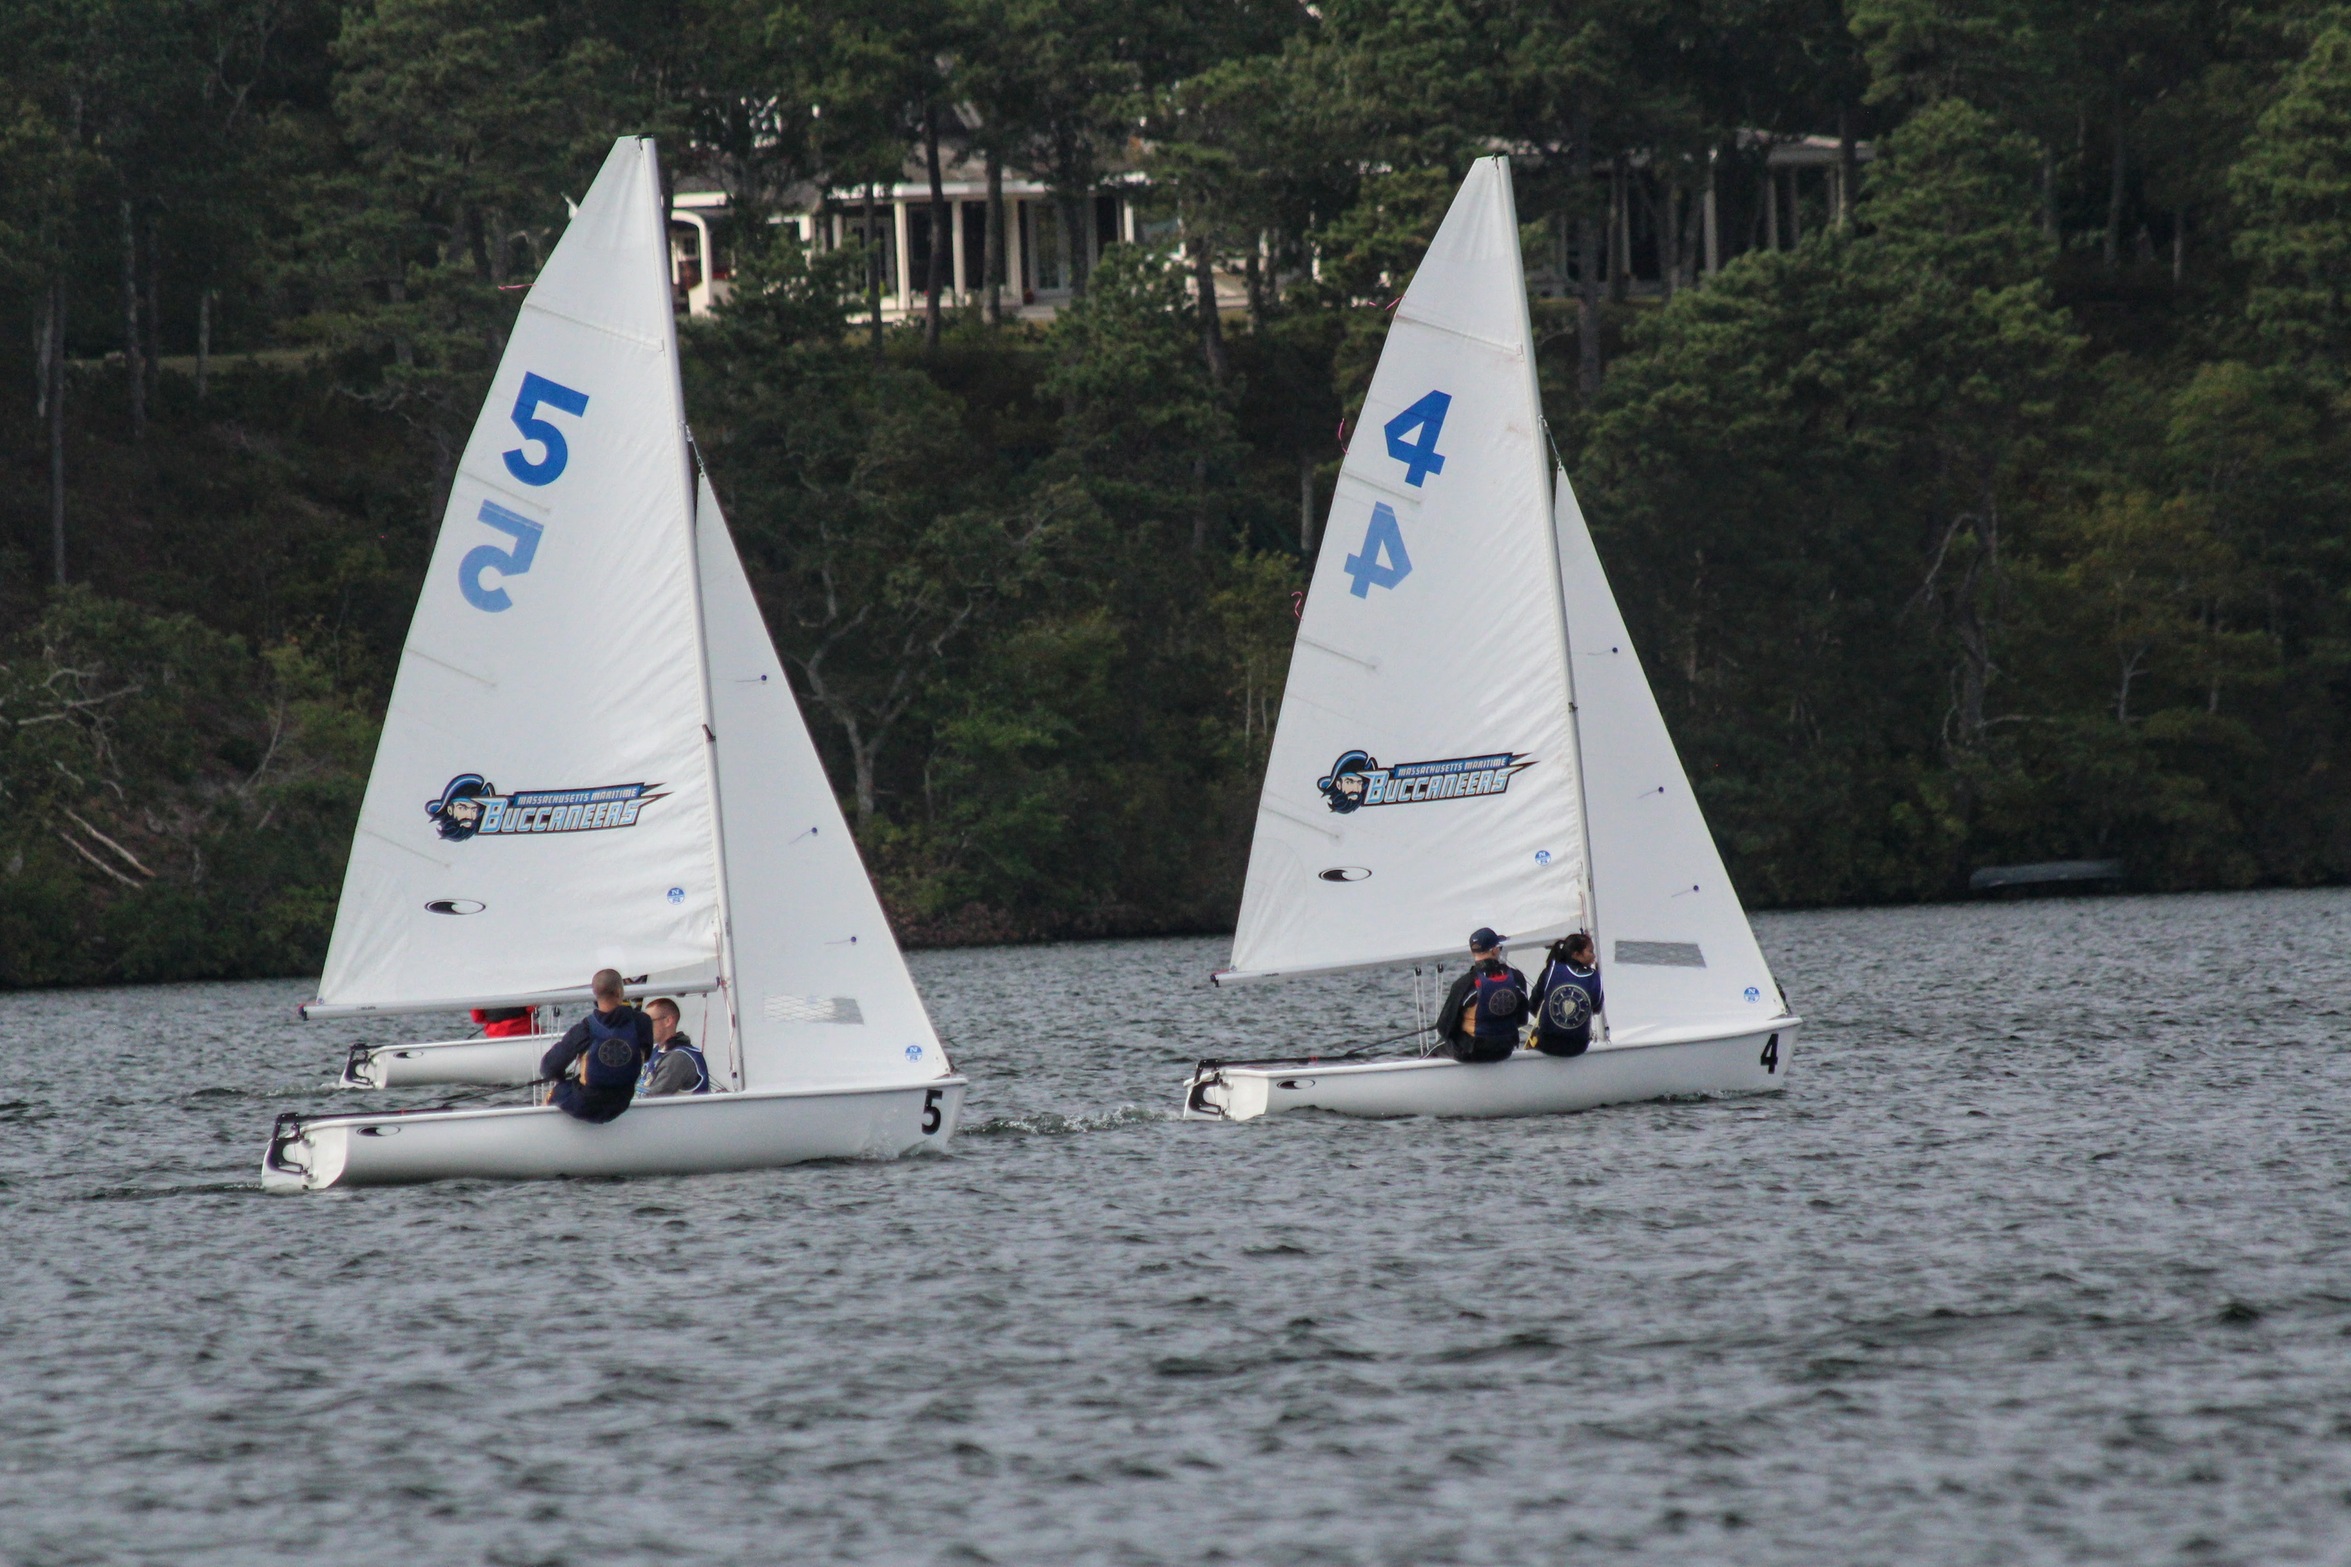 Bucs Sail to Second Place Finish at NE Dinghy Tournament